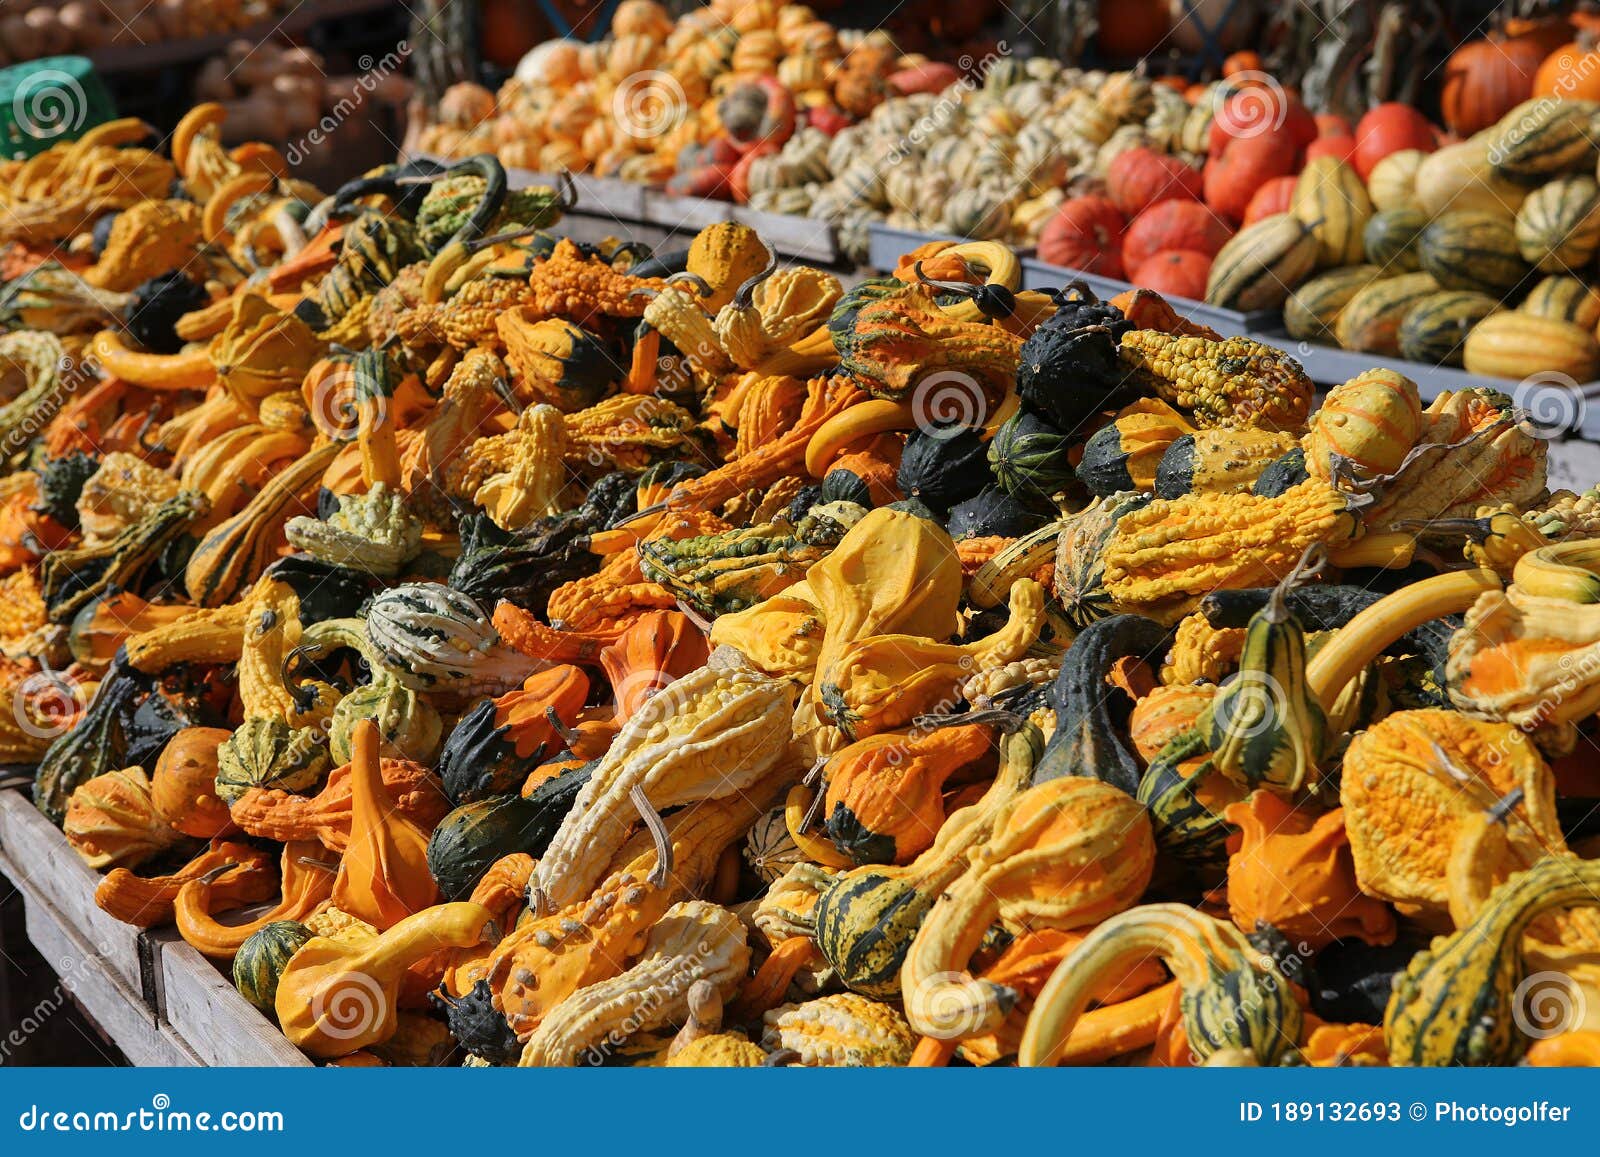 squashs in a market, montreal, quebec, canada